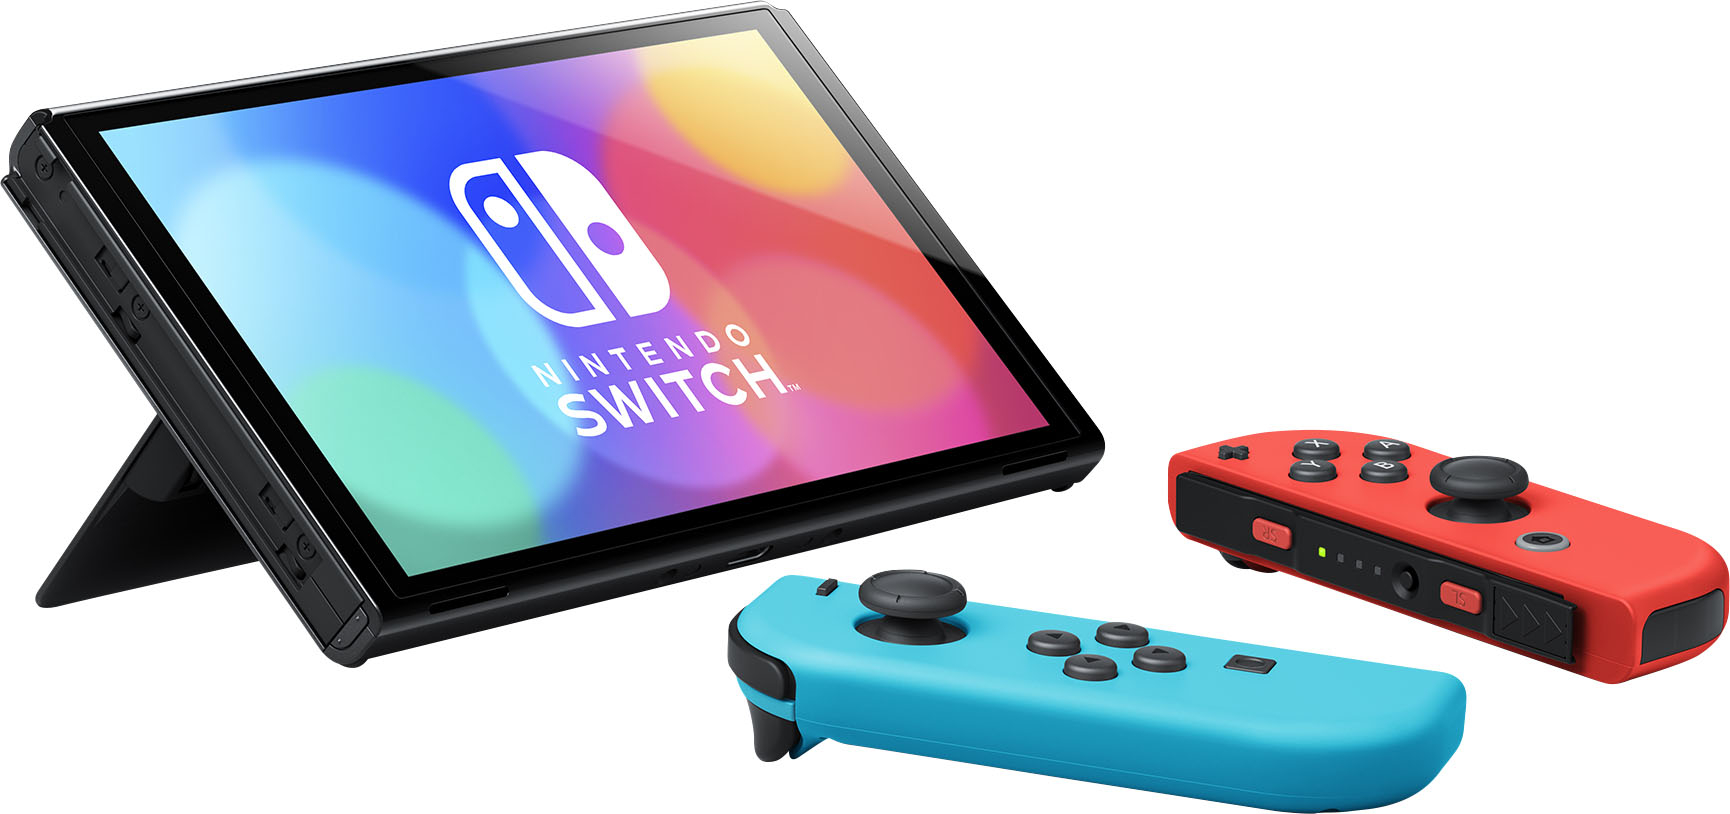 Another Code: Recollection Nintendo Switch, Nintendo Switch – OLED Model, Nintendo  Switch Lite - Best Buy